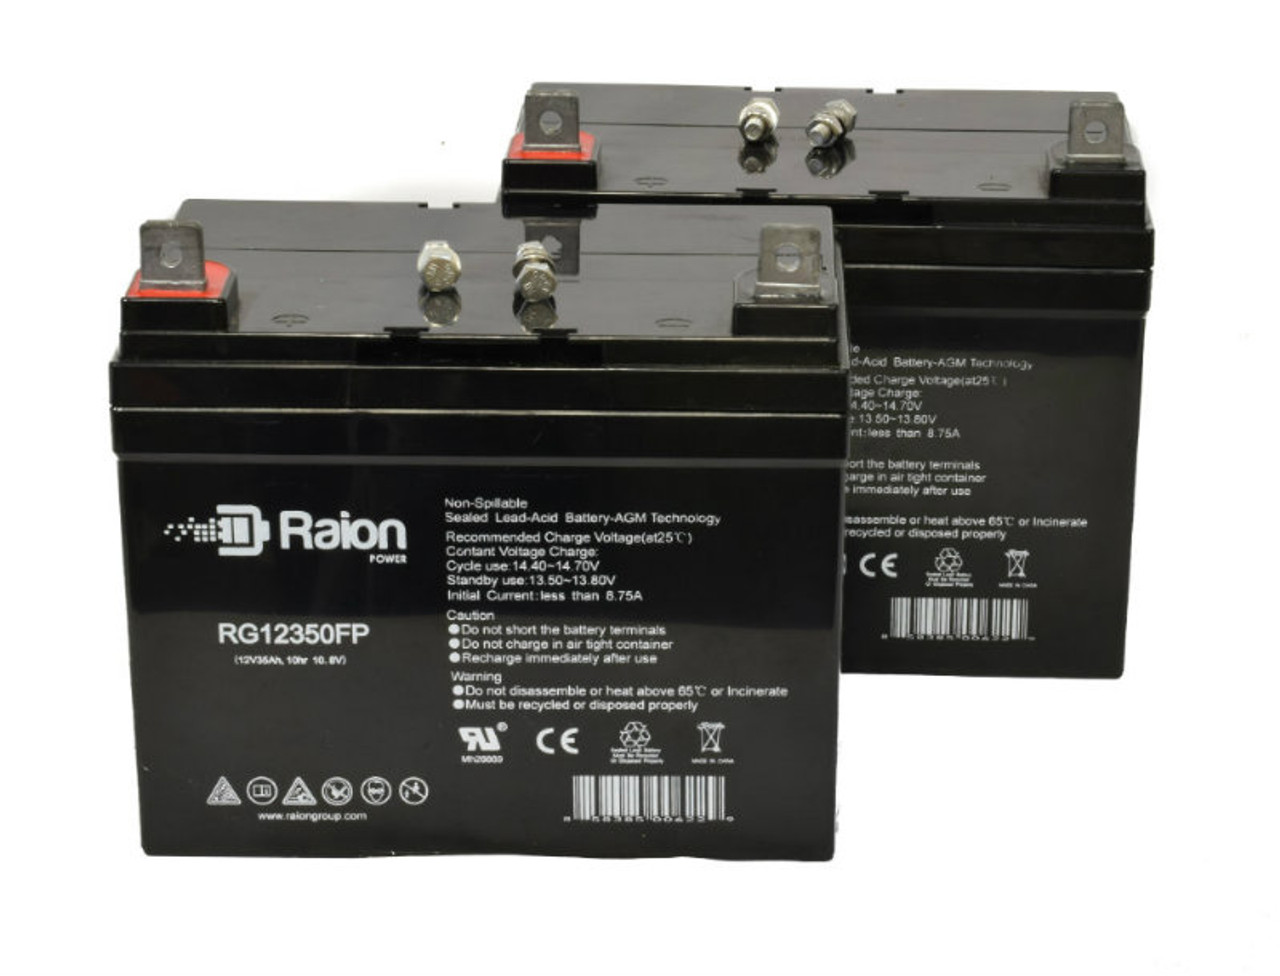 Raion Power Replacement 12V 35Ah Lawn Mower Battery for Cub Cadet 182 - 2 Pack